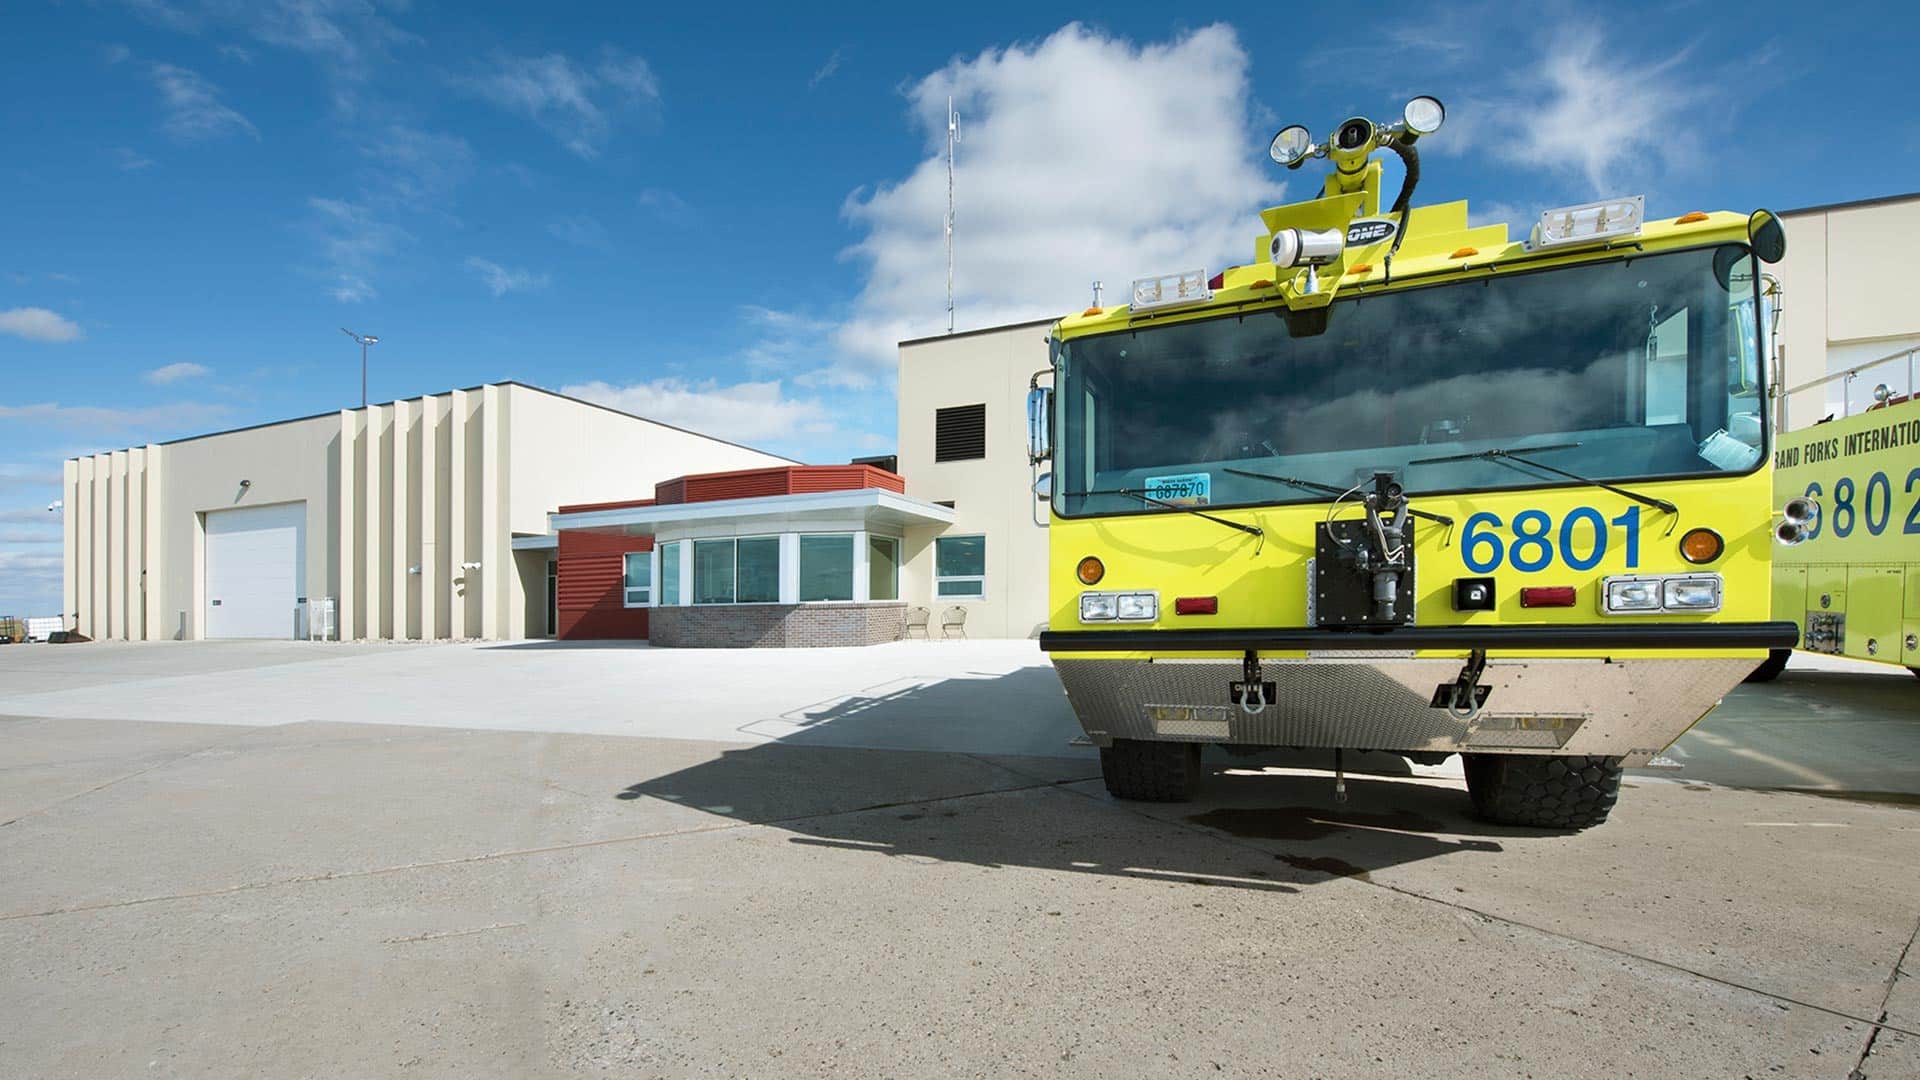 Grand Forks International Airport Aircraft Rescue & Firefighting Station